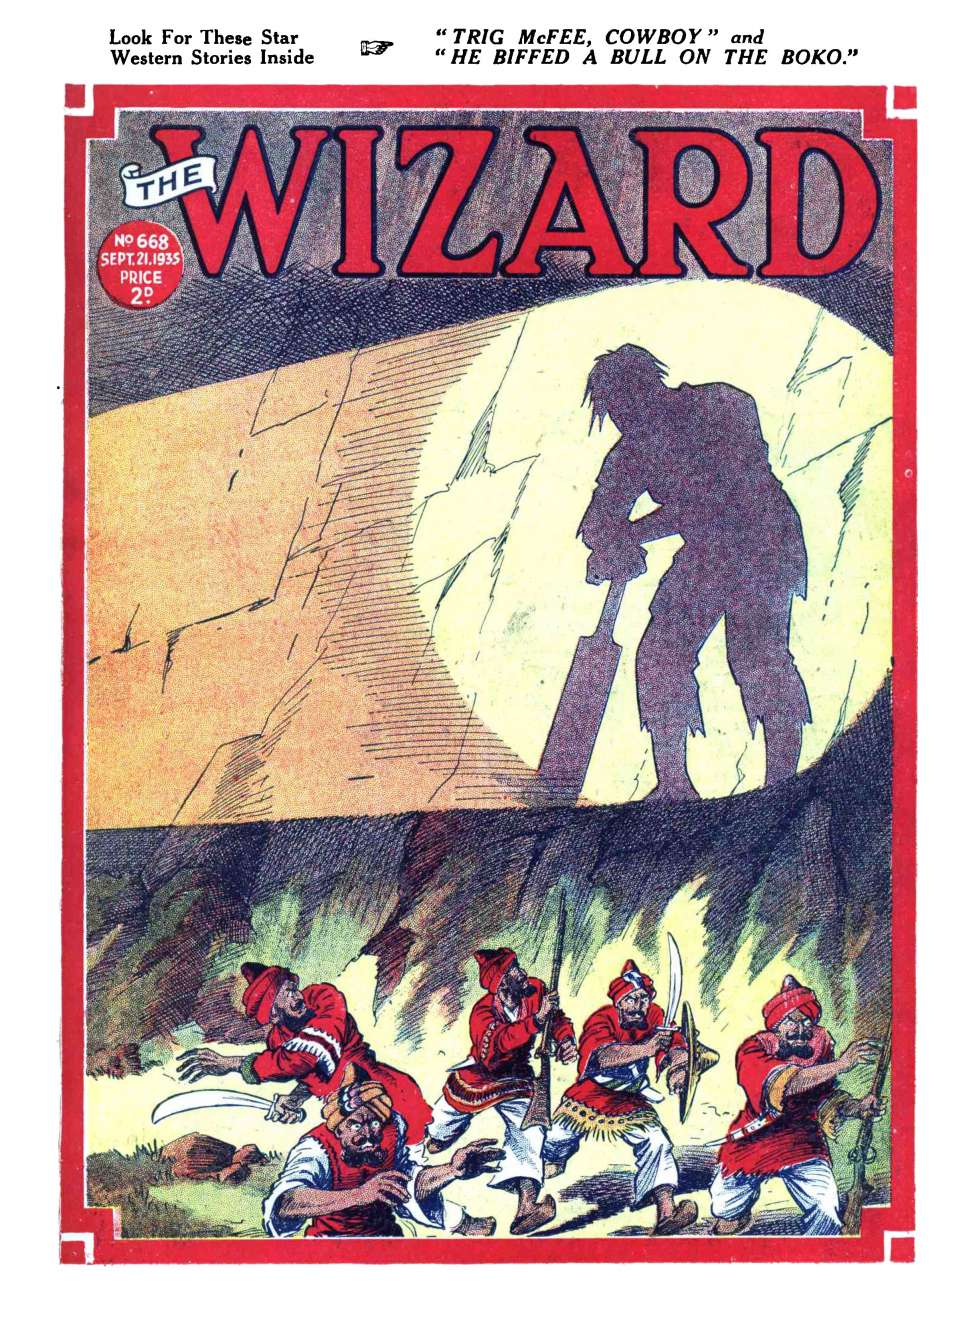 Book Cover For The Wizard 668